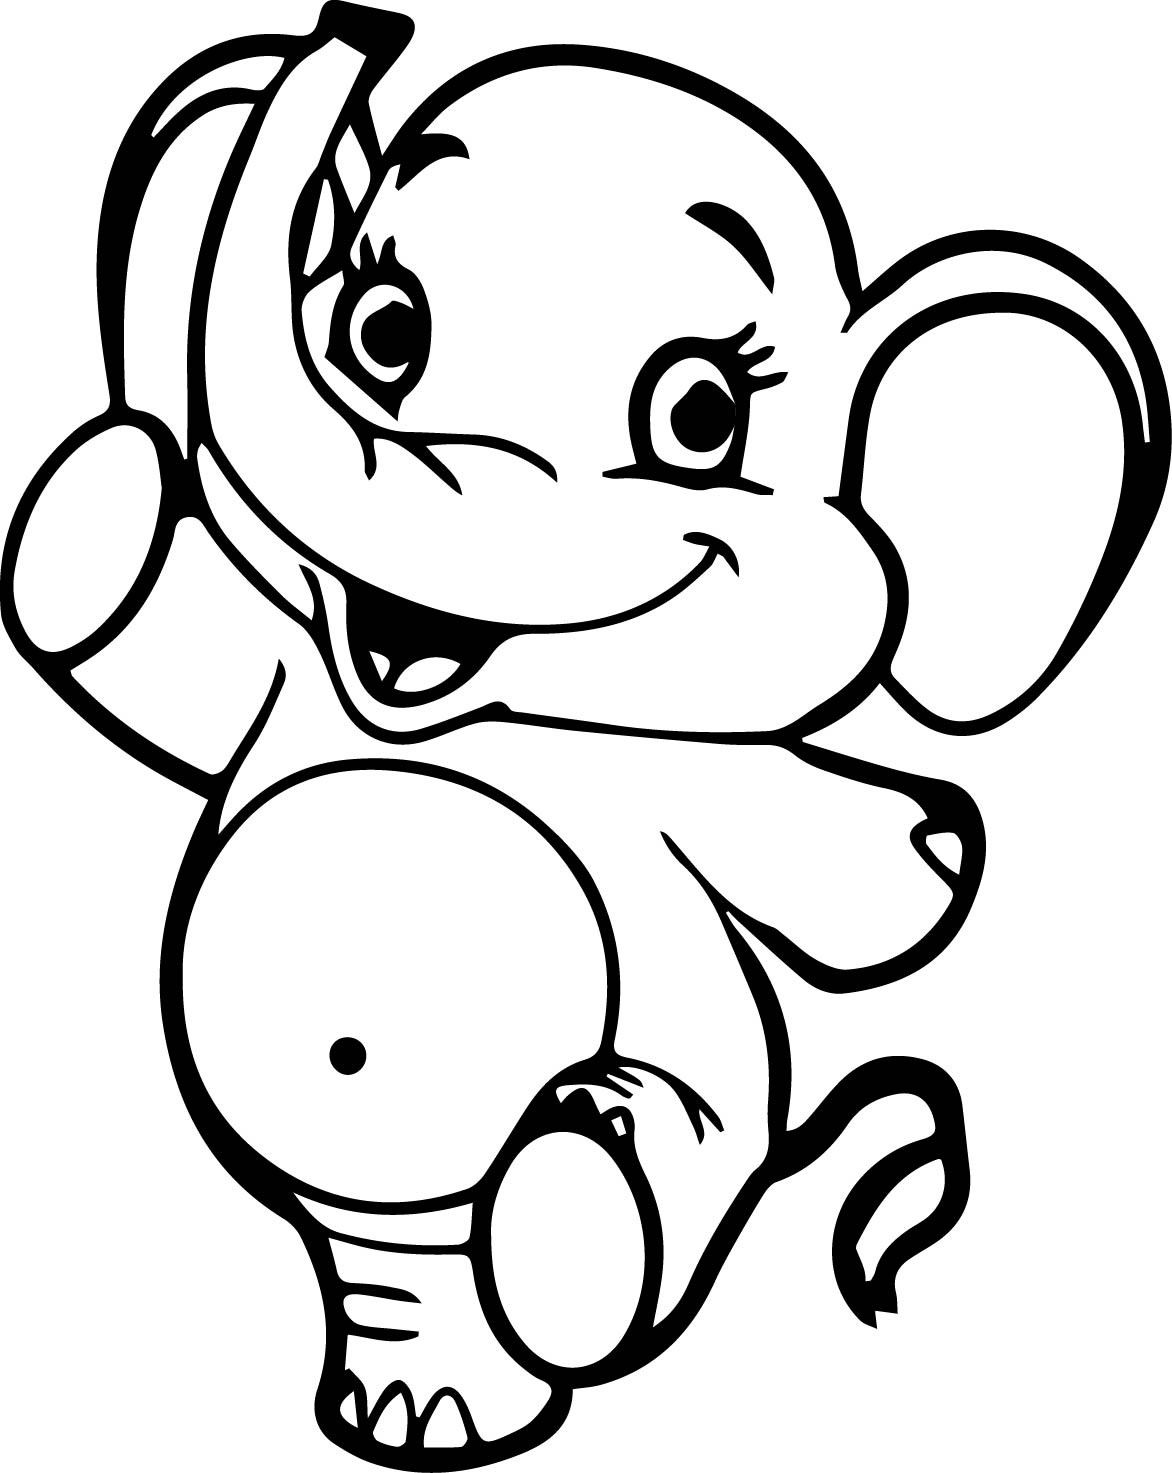 Baby Elephant Coloring Pages
 Elephant Baby Drawing at GetDrawings